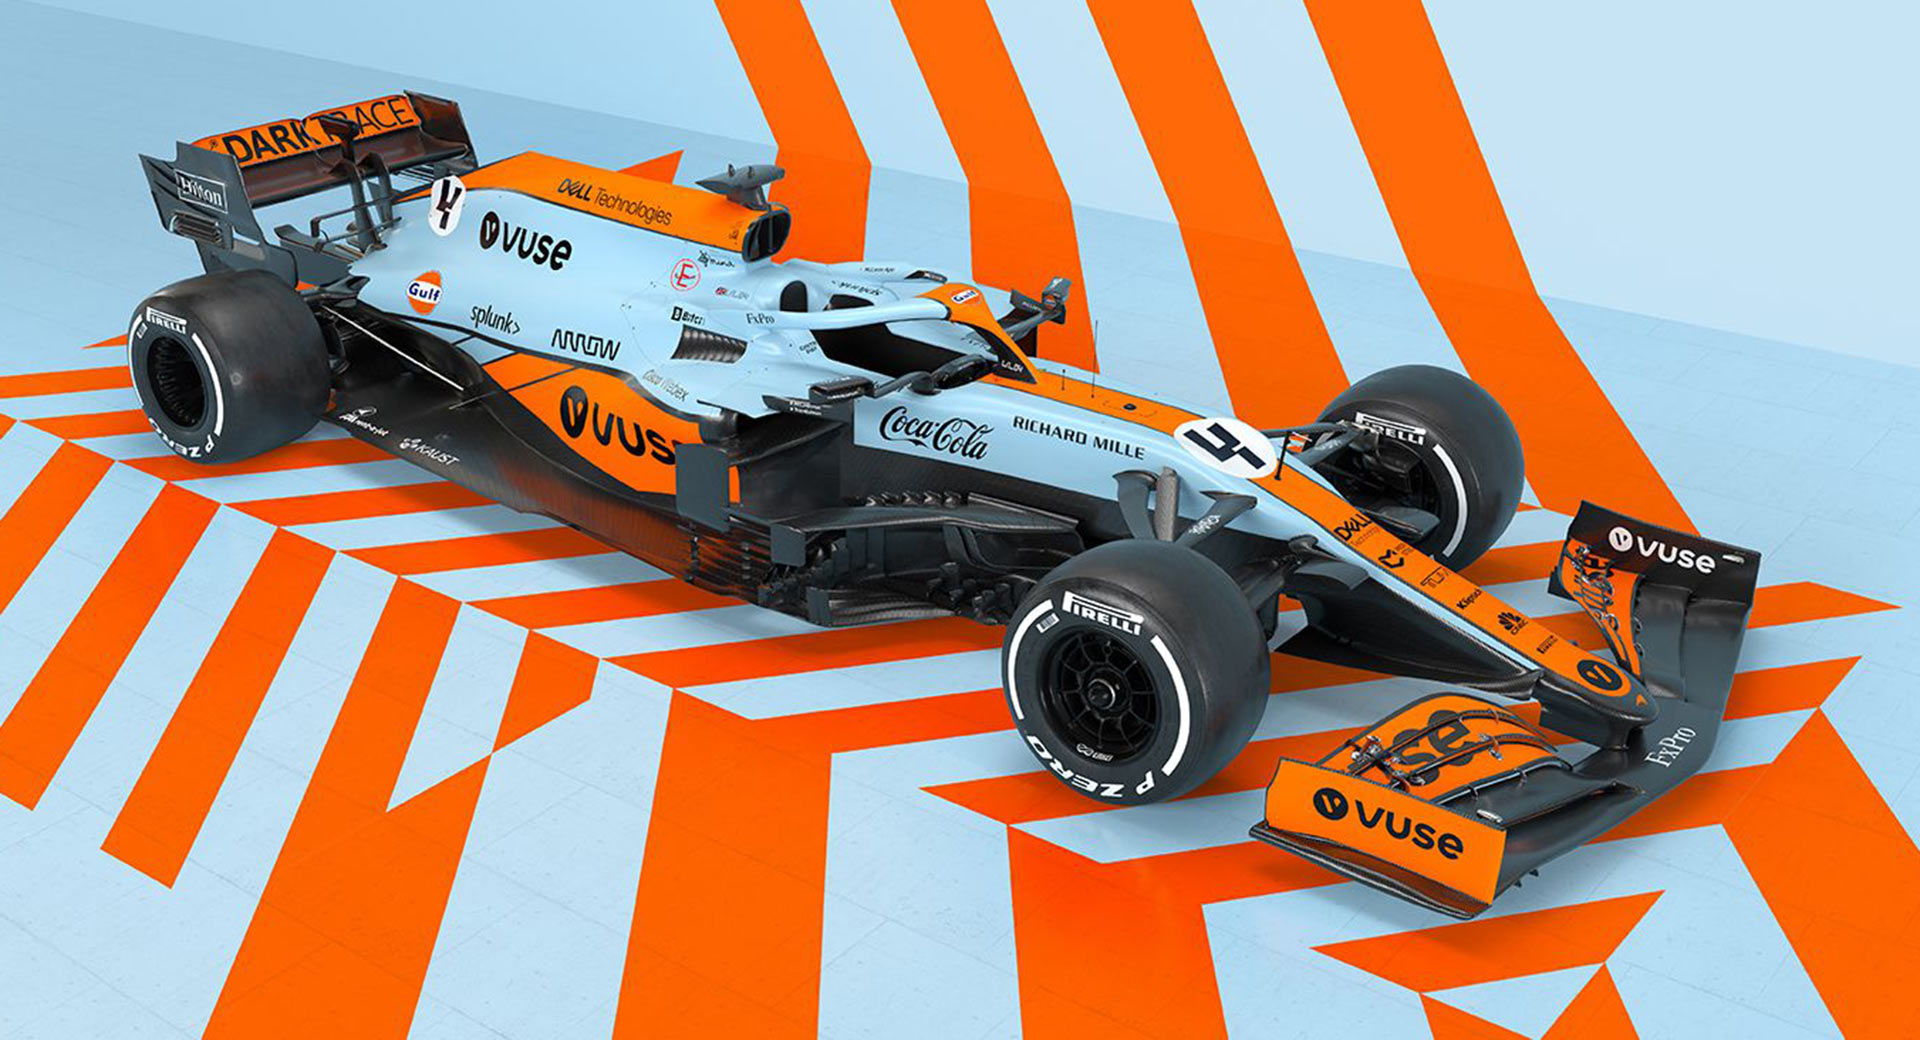 Mclaren S F1 Car Gets A Gulf Livery For This Weekend S Monaco Grand Prix Carscoops